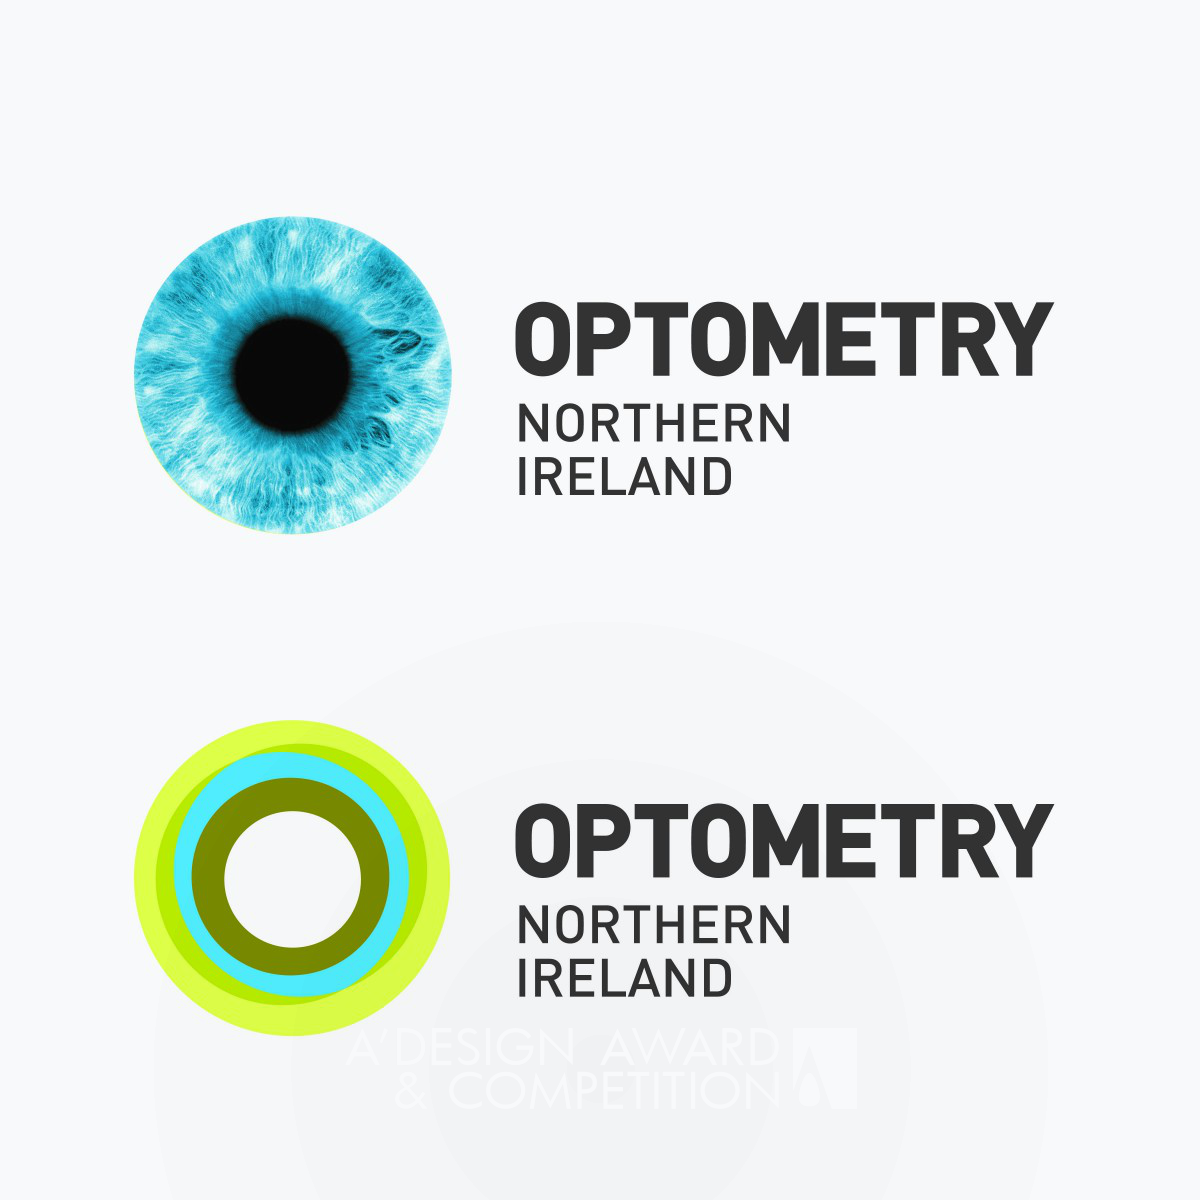 Optometry NI  Brand Identity and Visual Communications by Creative Media